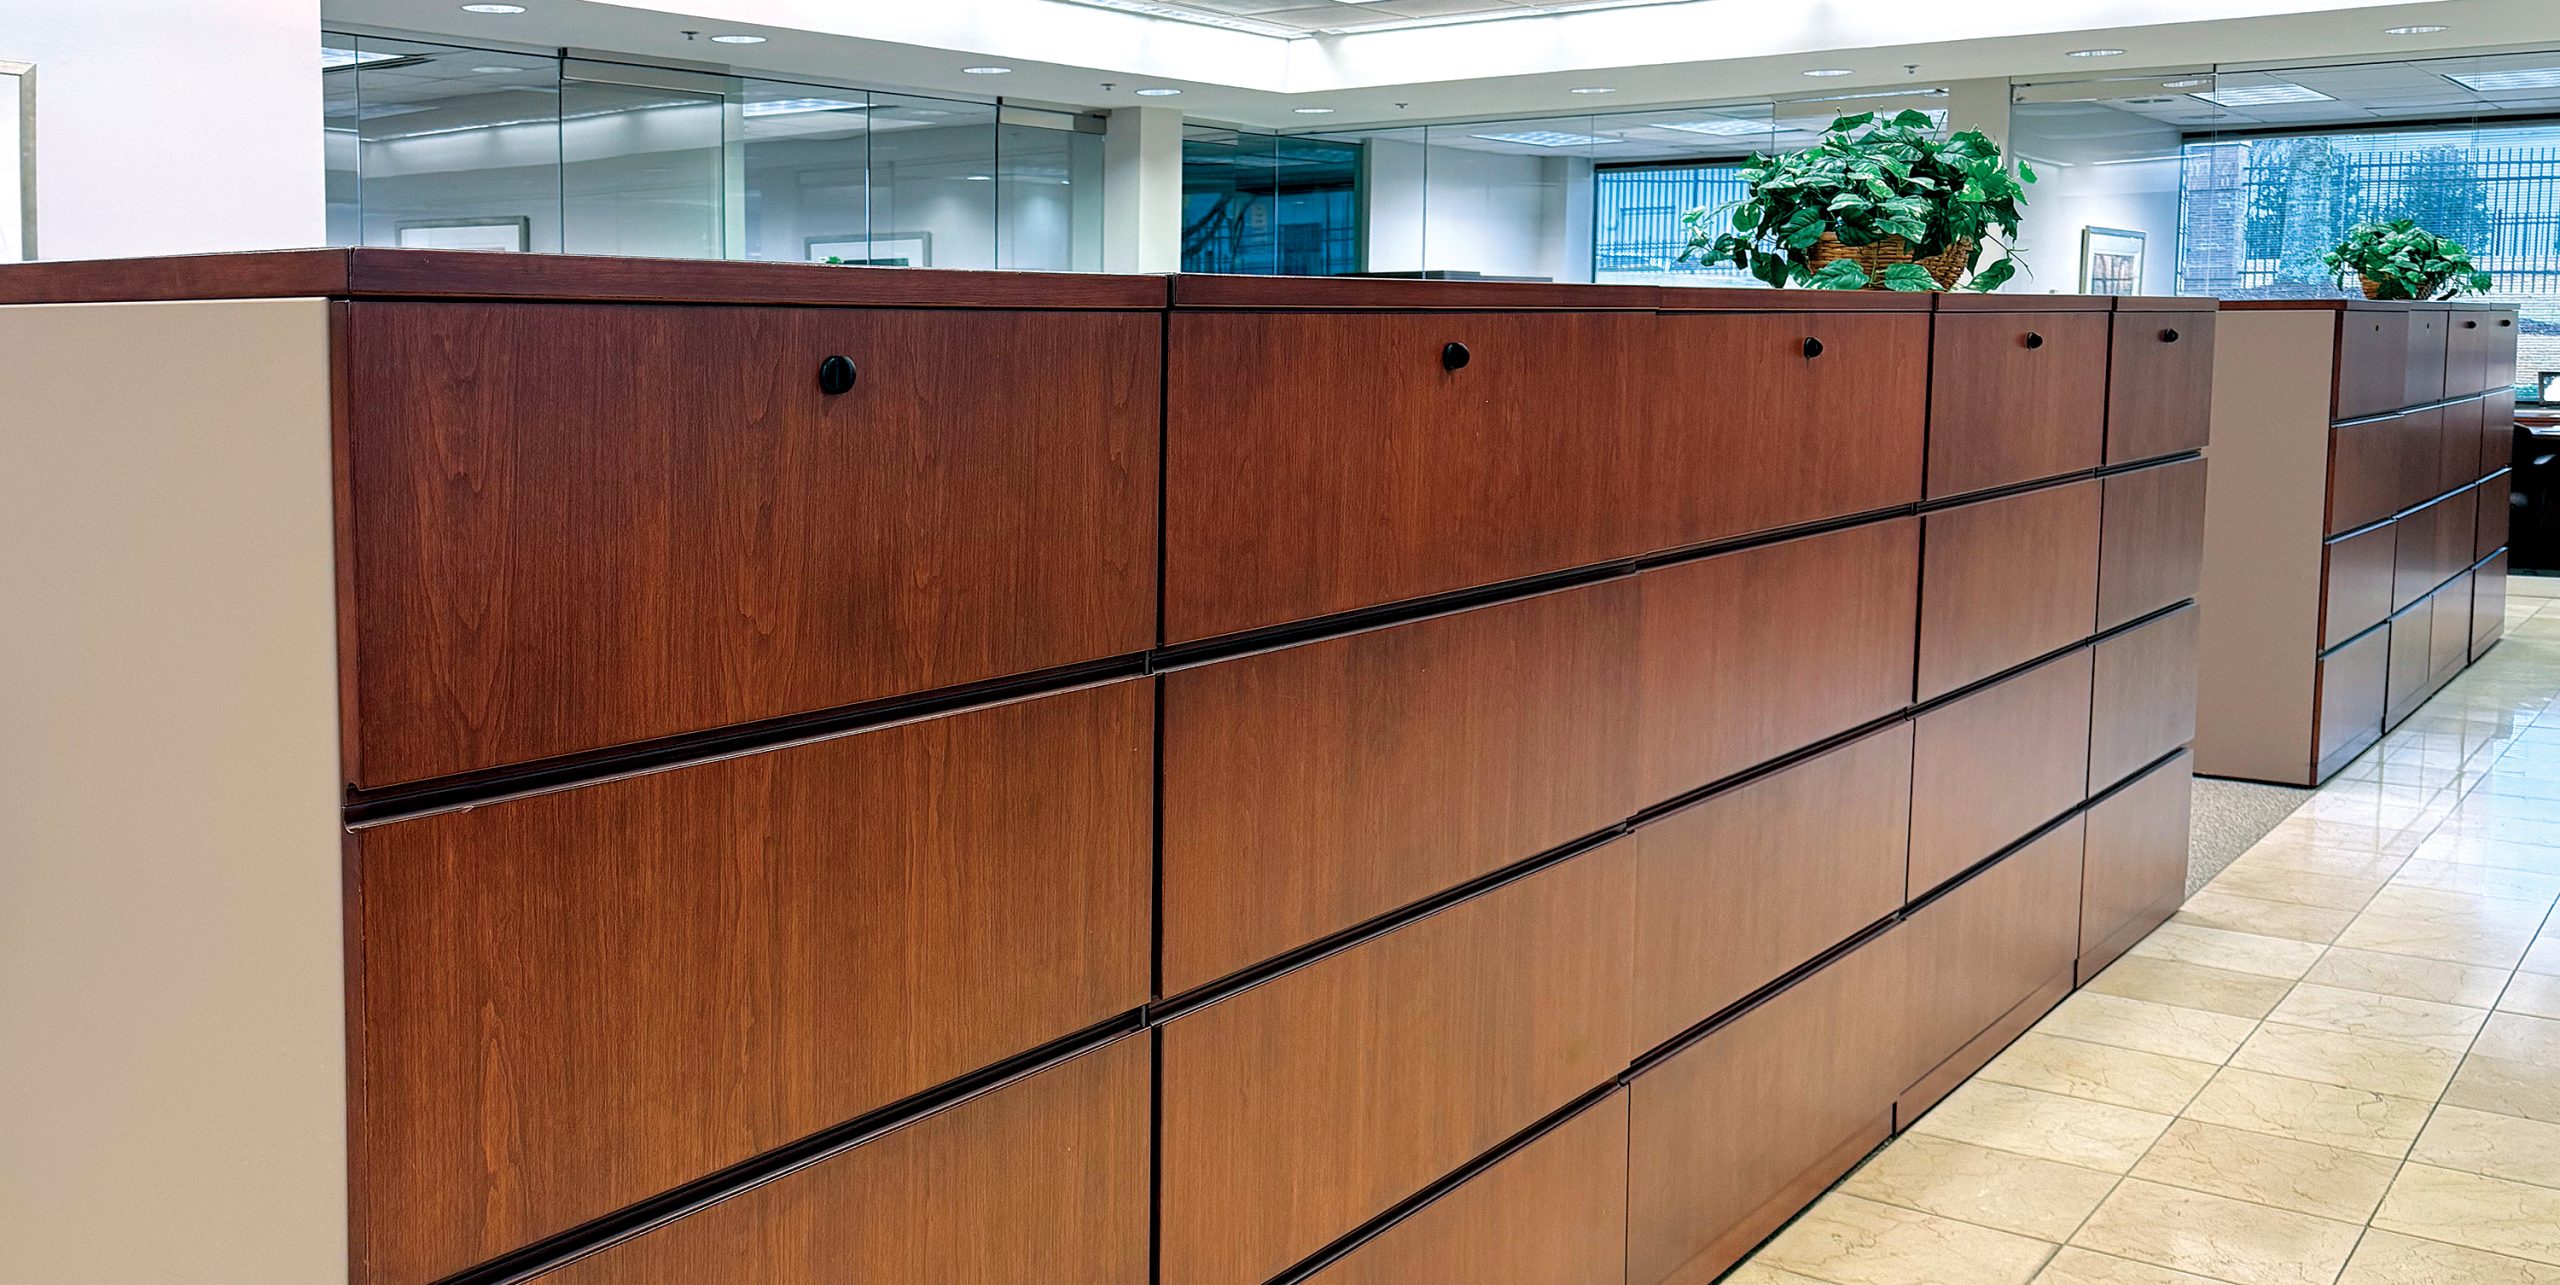 long bank of filing cabinets in an office setting; these drawers have the anti-tip system installed, to ensure they do not fall over on top of the user